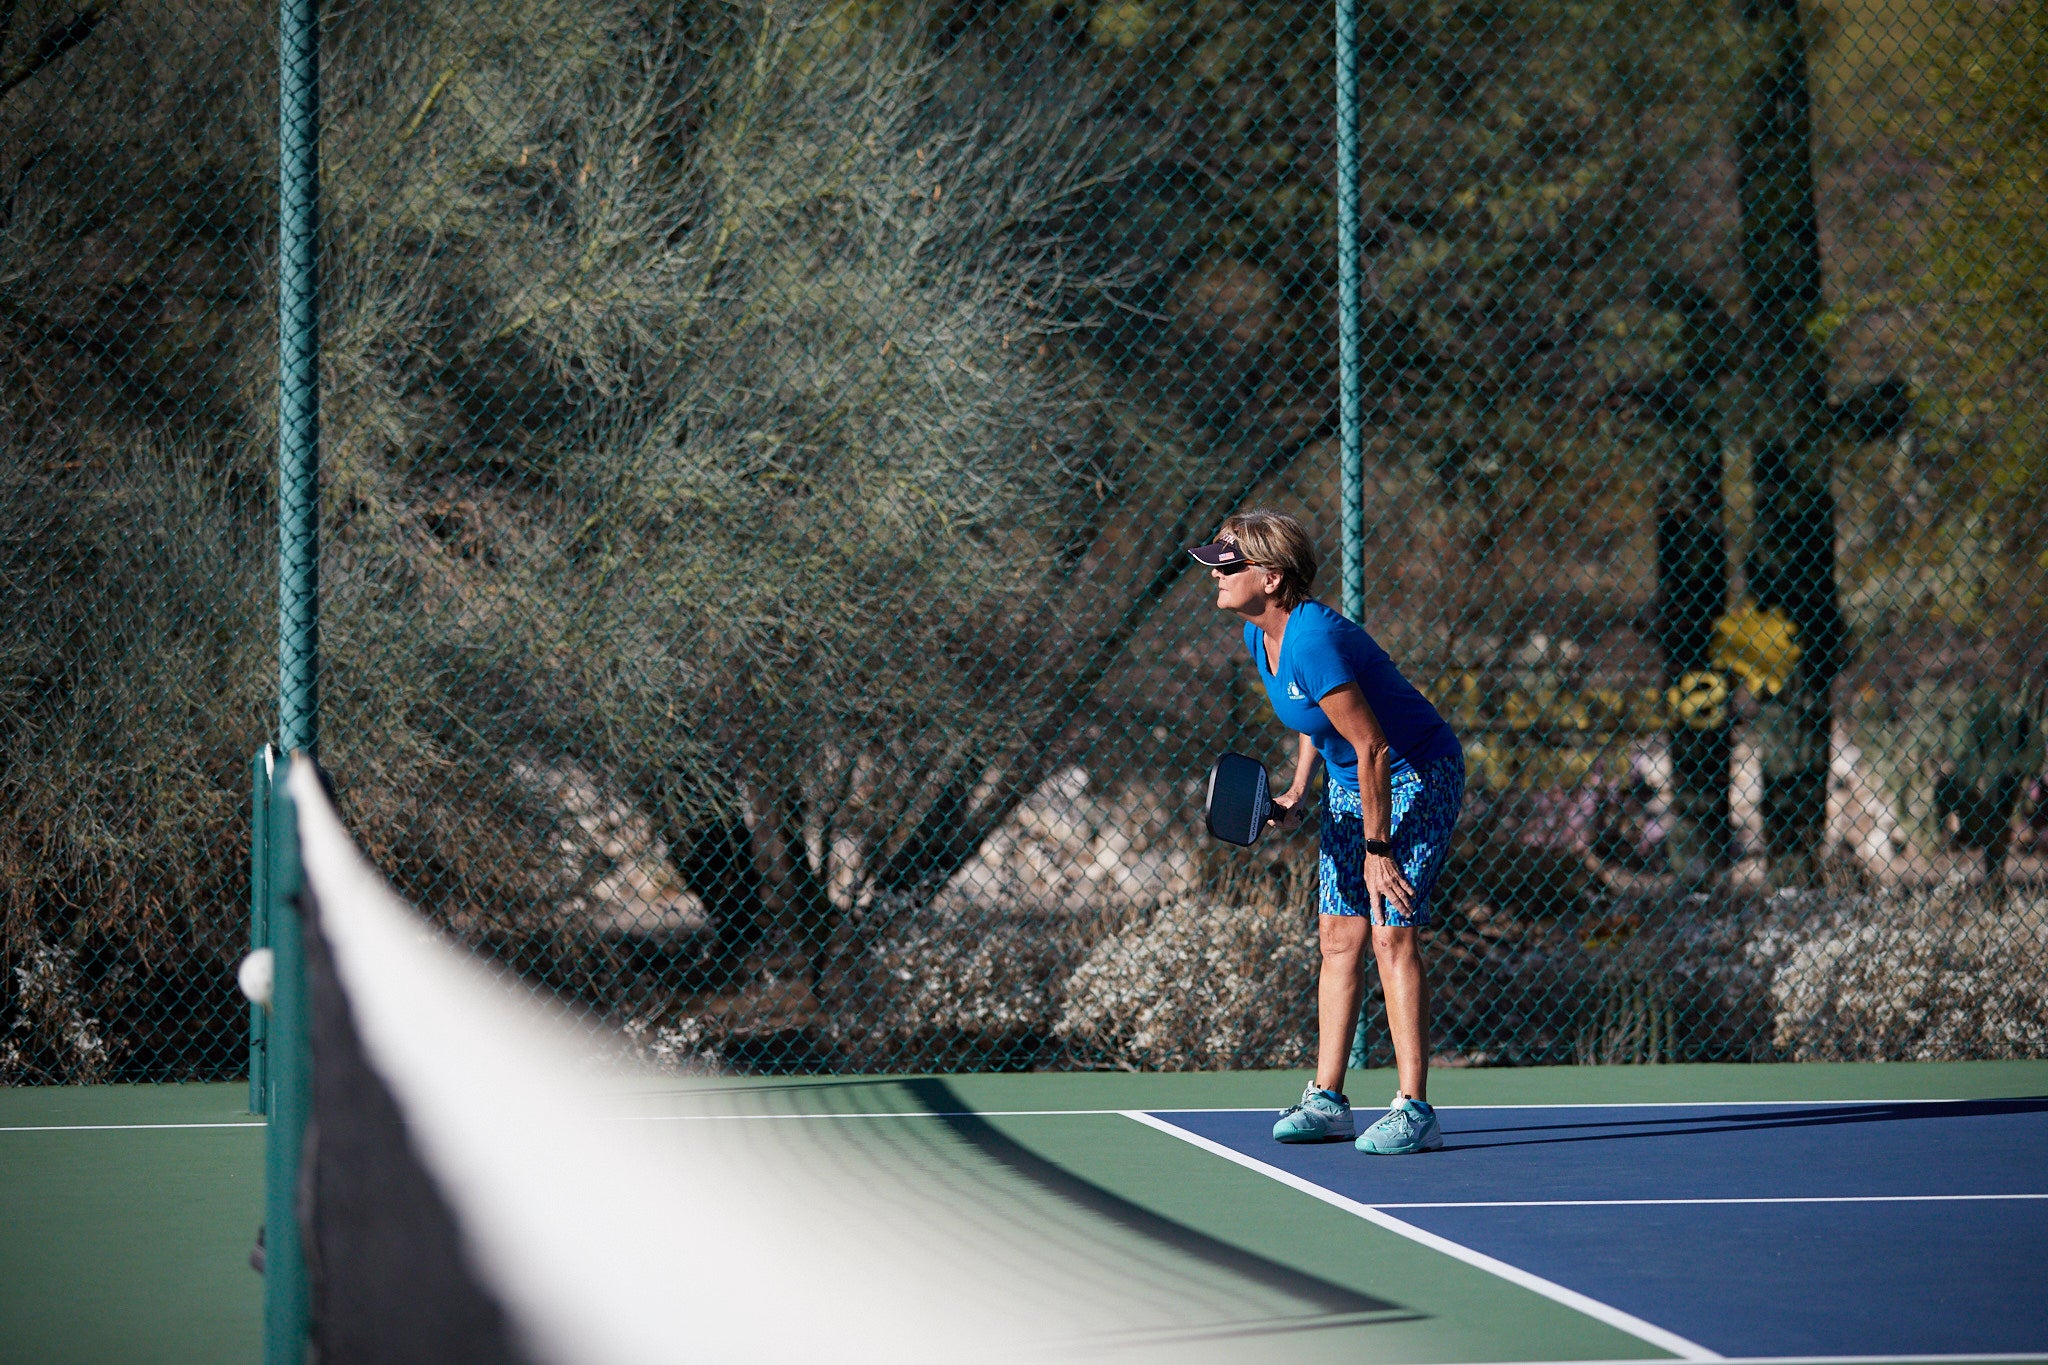 Temporary Pickleball Court Lines & Nets - Everything You Need!